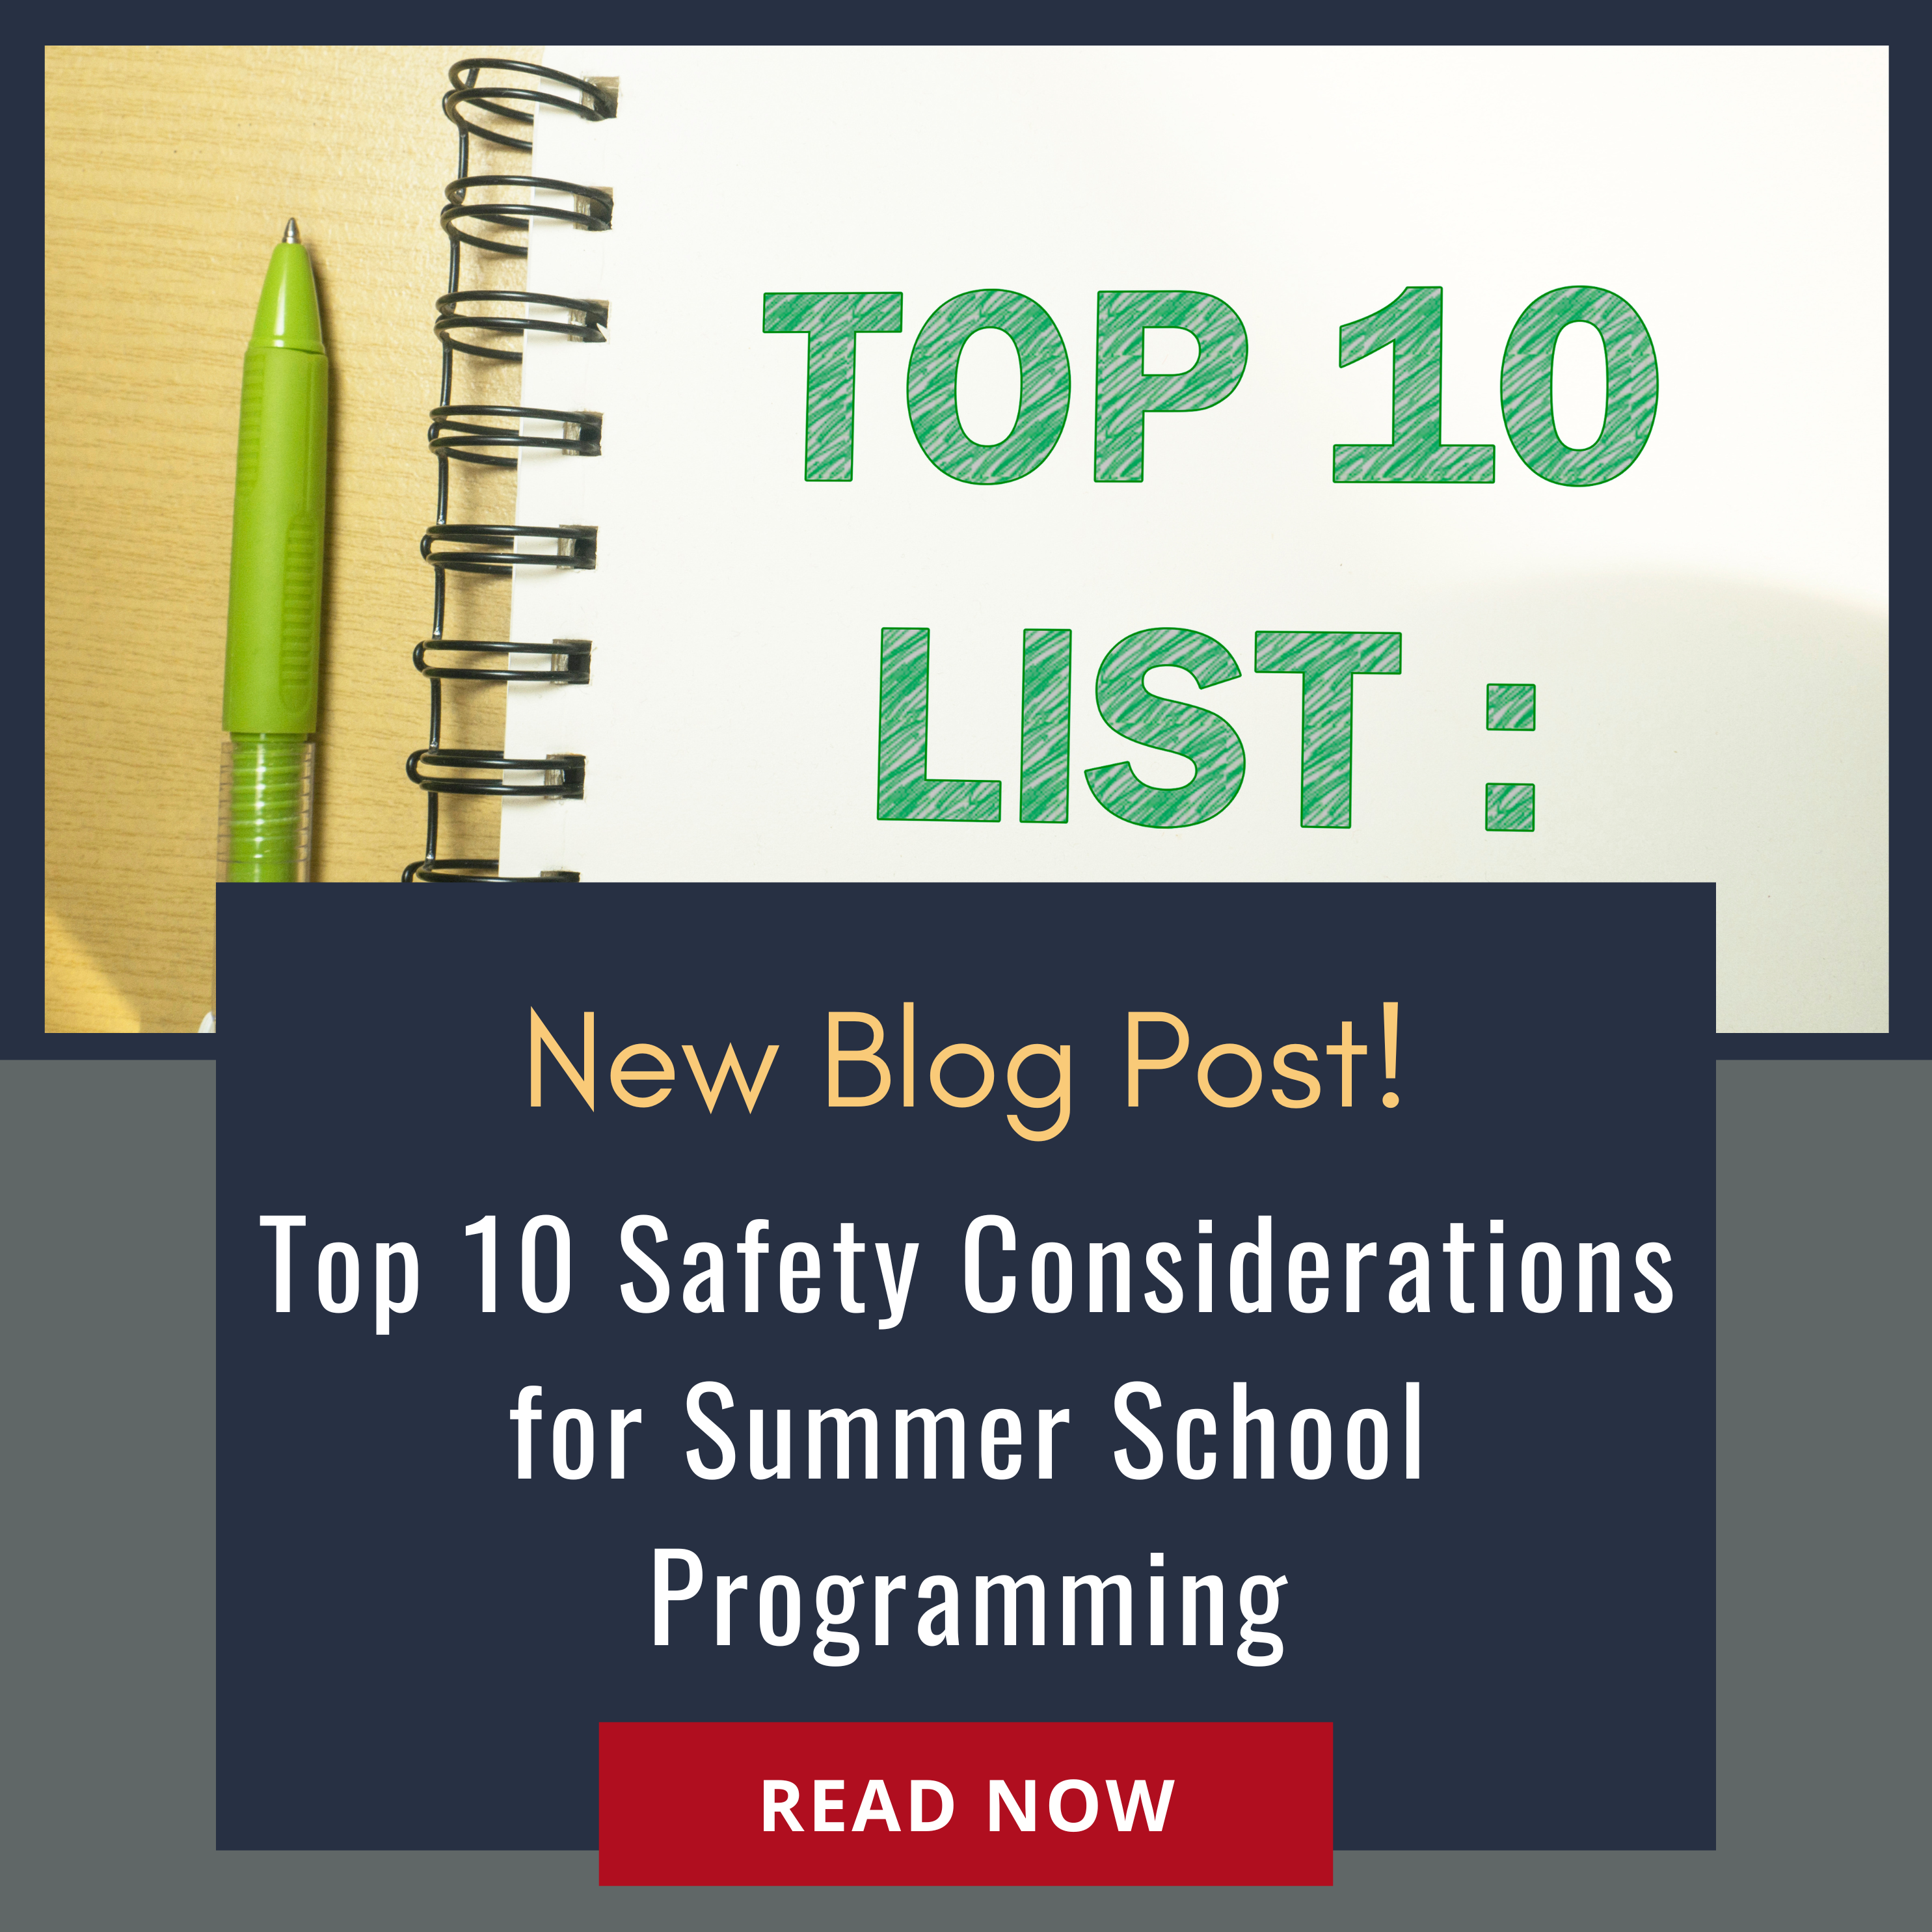 Top 10 Safety Considerations for Summer School Programming